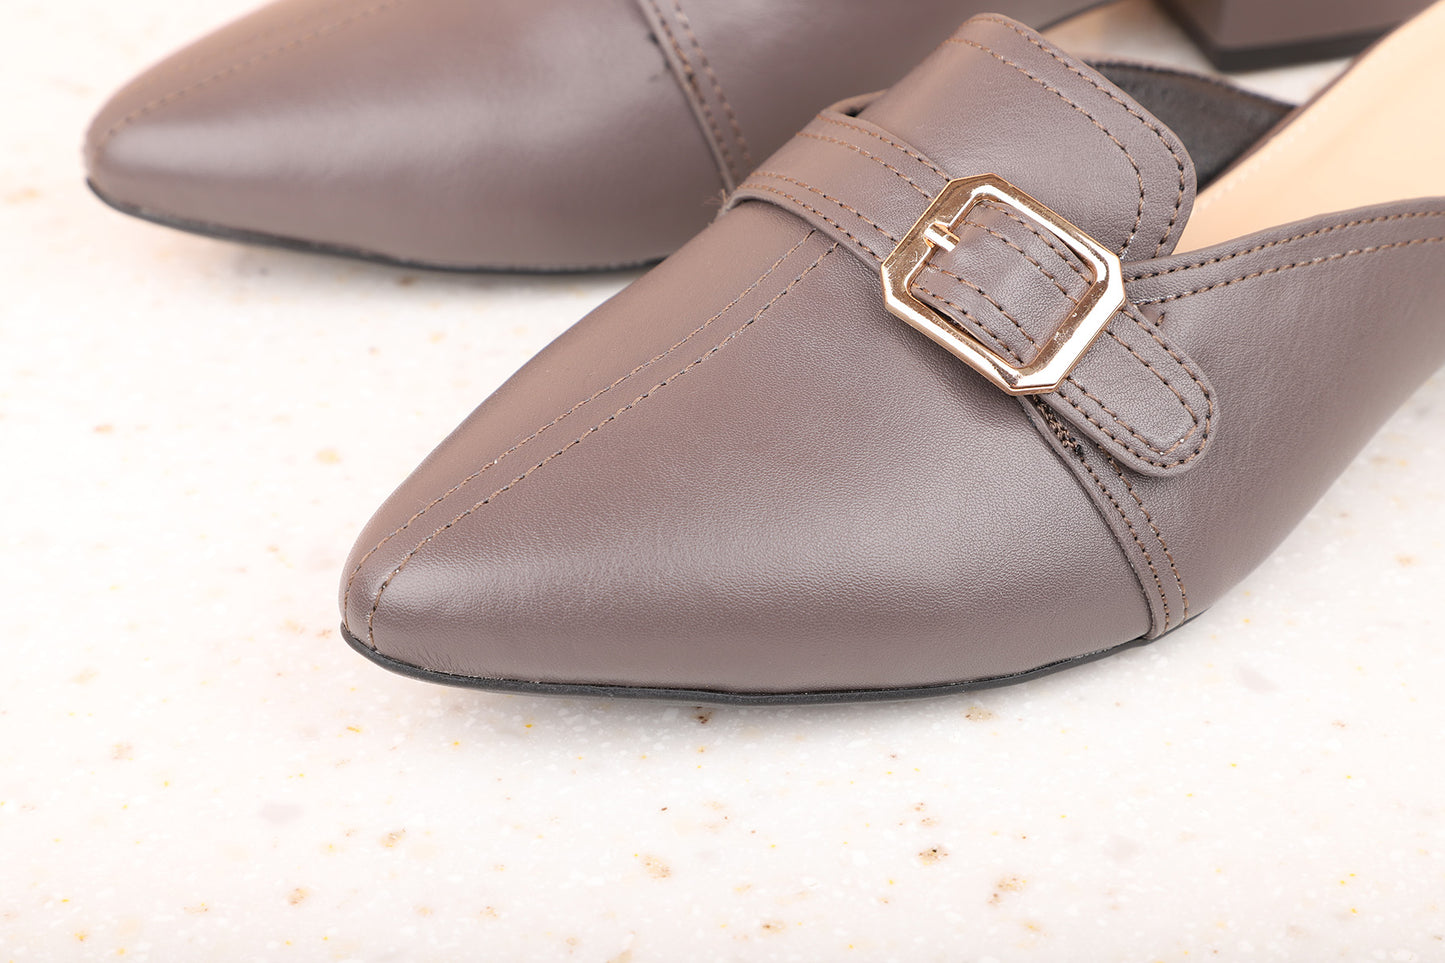 Women Grey Mules with Buckles